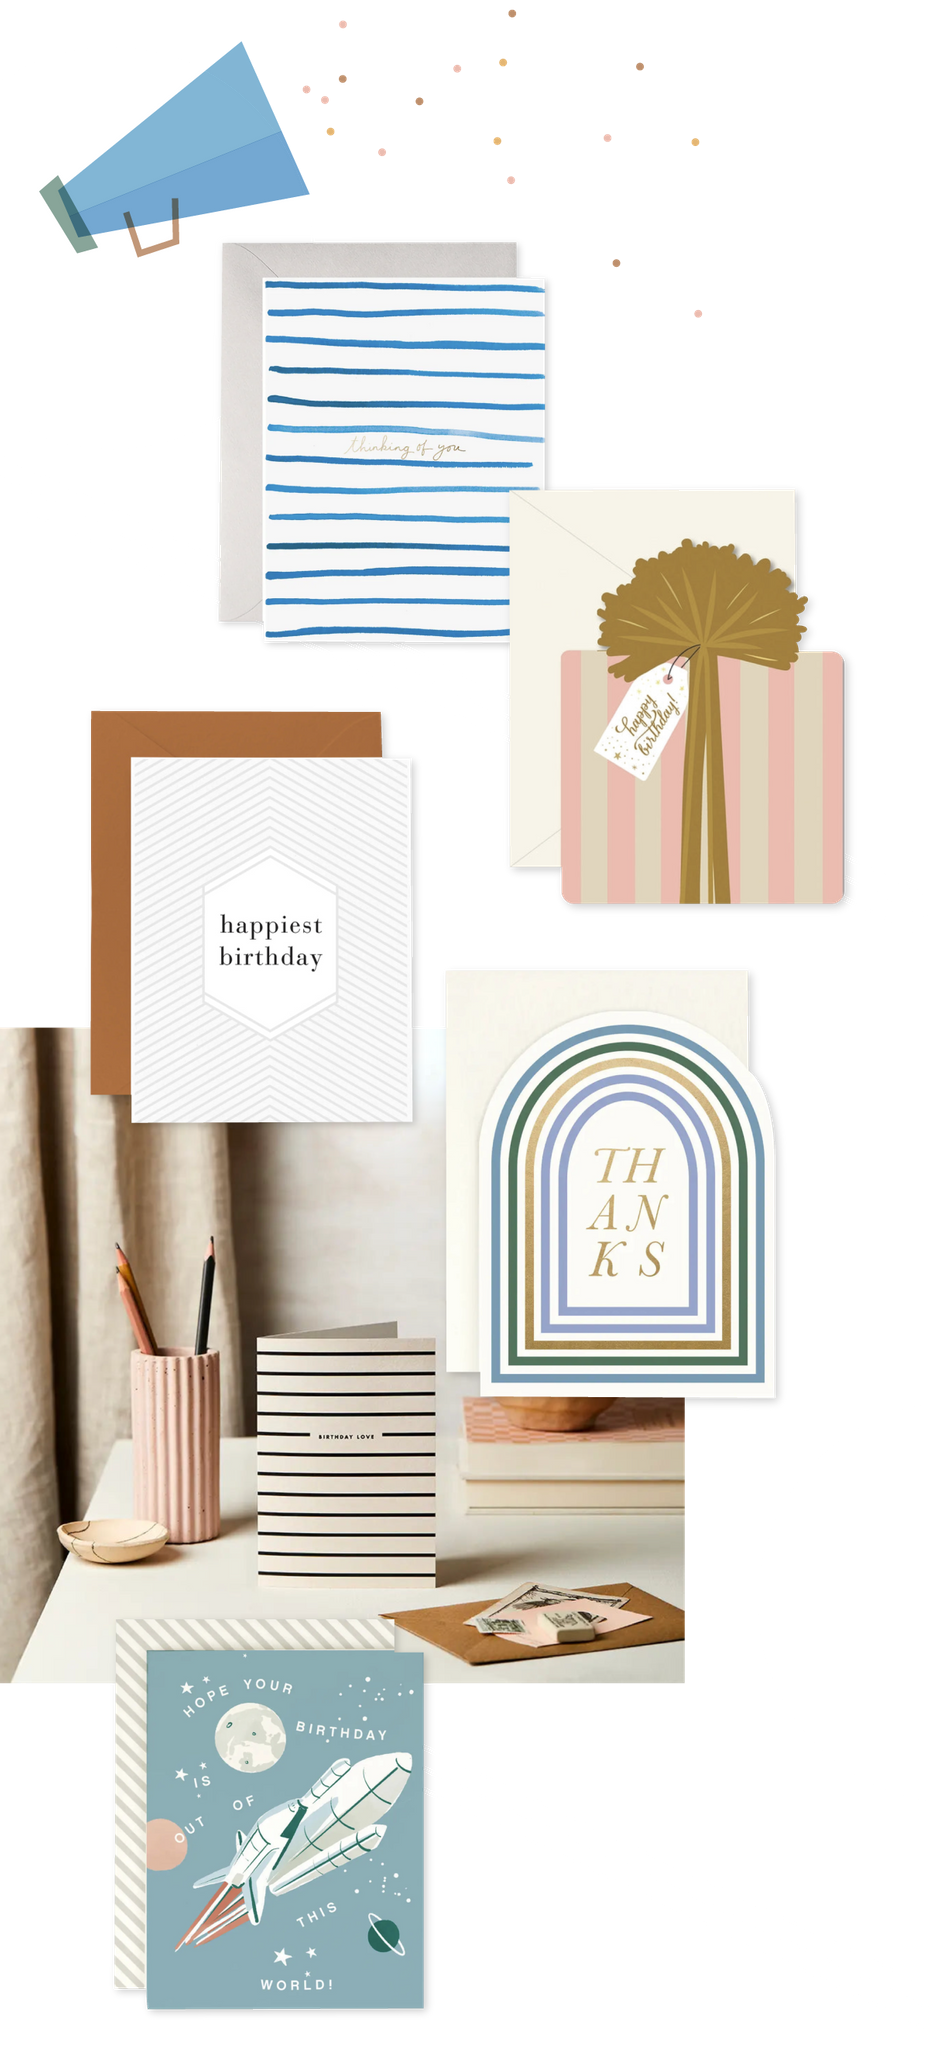 urbanic paper boutique los angeles california gifts stationery gift wrap birthday thinking of you thanks greeting cards